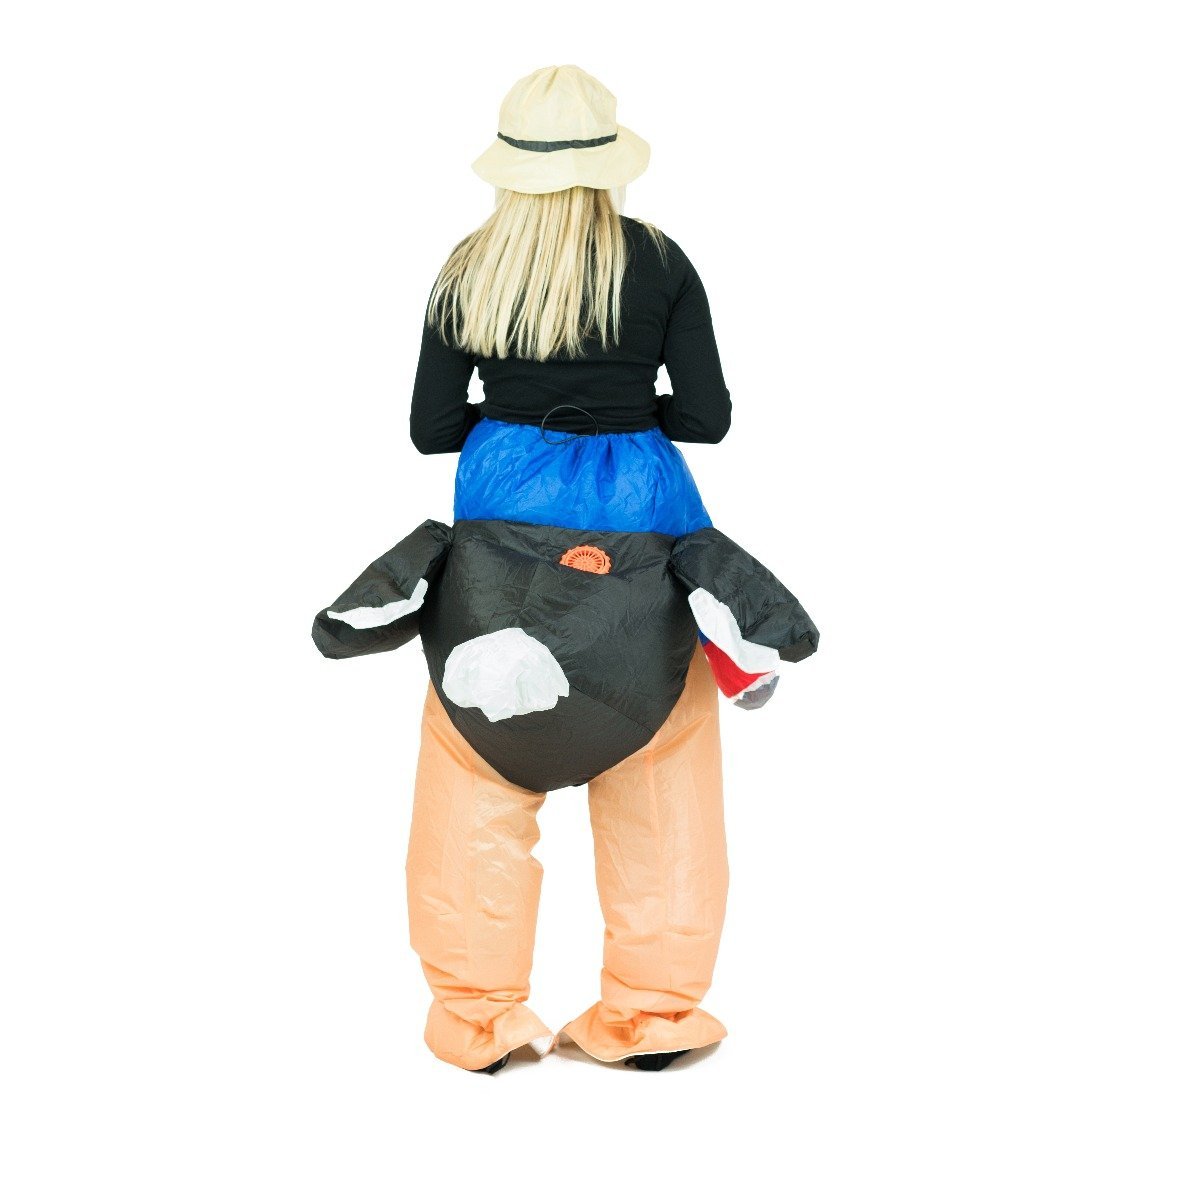 Bodysocks - Inflatable Ostrich Costume